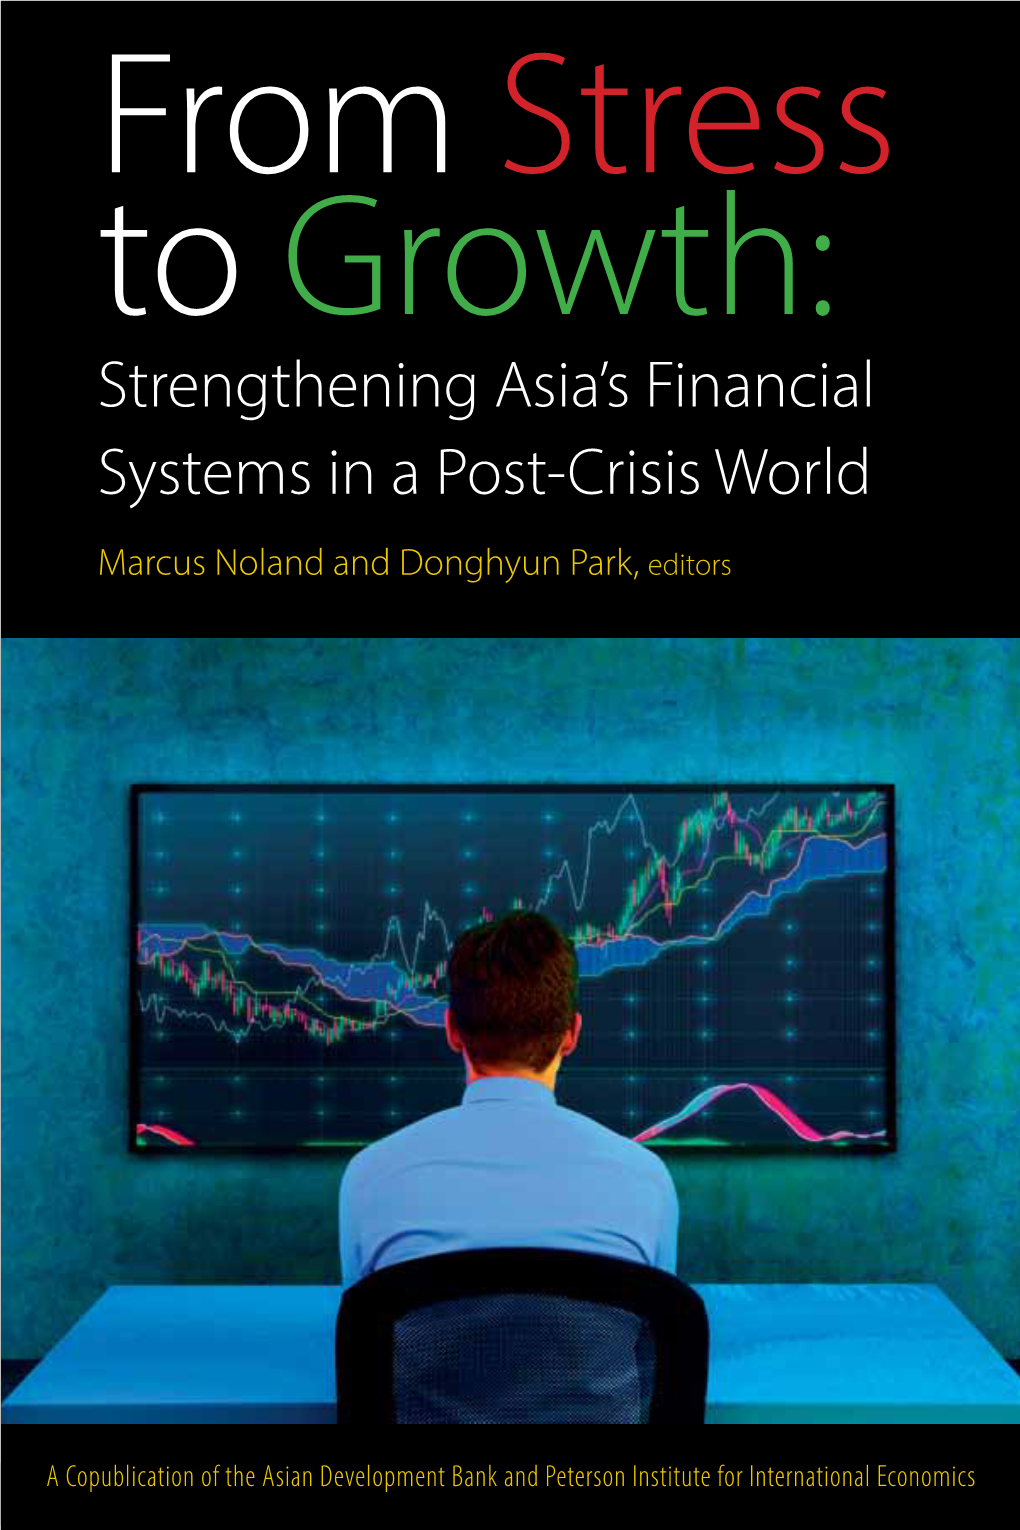 From Stress to Growth: Strengthening Asia's Financial Systems in a Post-Crisis World